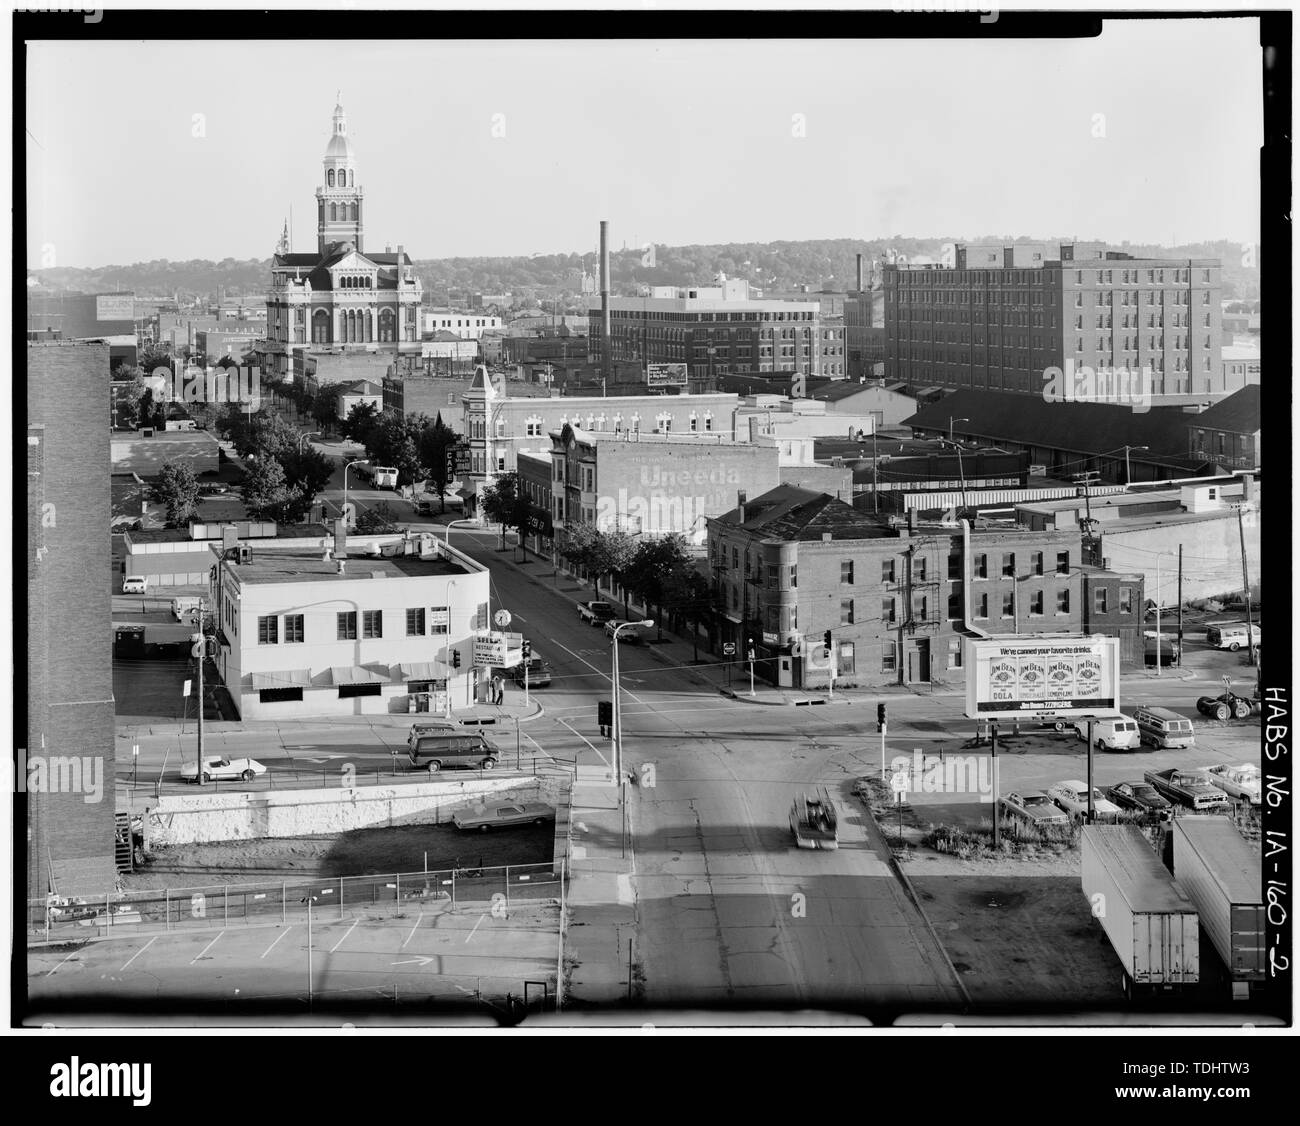 OVERALL VIEW OF DUBUQUE COMMERCIAL-INDUSTRIAL DISTRICT, LOOKING UP CENTRAL AVENUE, WITH KARIGAN'S RESTAURANT IN LEFT FOREGROUND AND THE AMERICAN HOUSE HOTEL IN RIGHT FOREGROUND. VIEW TO NORTH. - Dubuque Commercial and Industrial Buildings, Dubuque, Dubuque County, IA; View of Dubuque, Iowa — in the  Dubuque Commercial and Industrial Buildings − HABS documentation project .  Image (c.1987): HABS—Historic American Buildings Survey of Iowa. Stock Photo